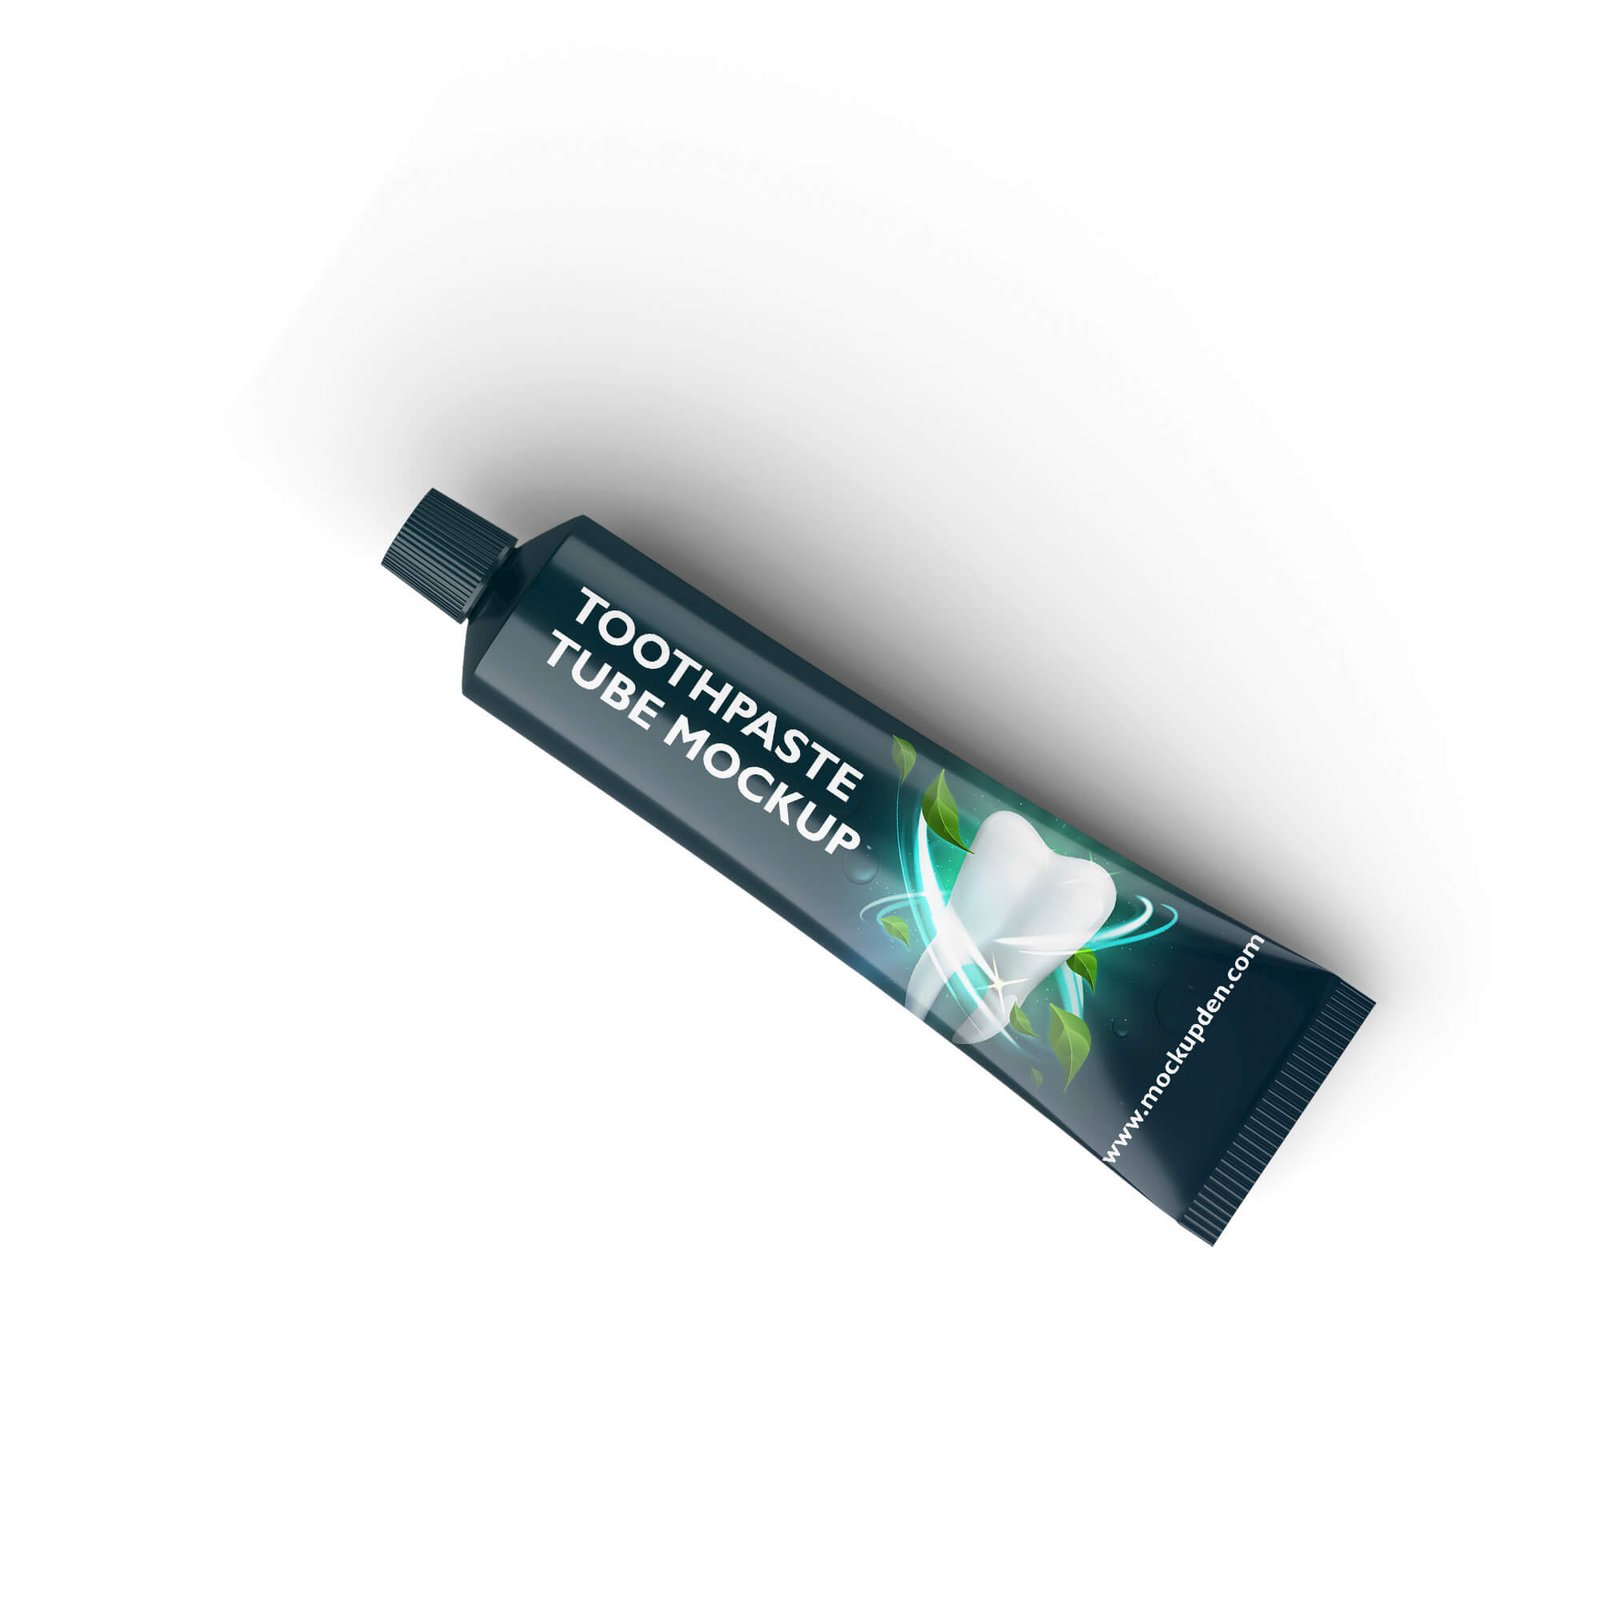 Design Free Toothpaste Tube Mockup PSD Template